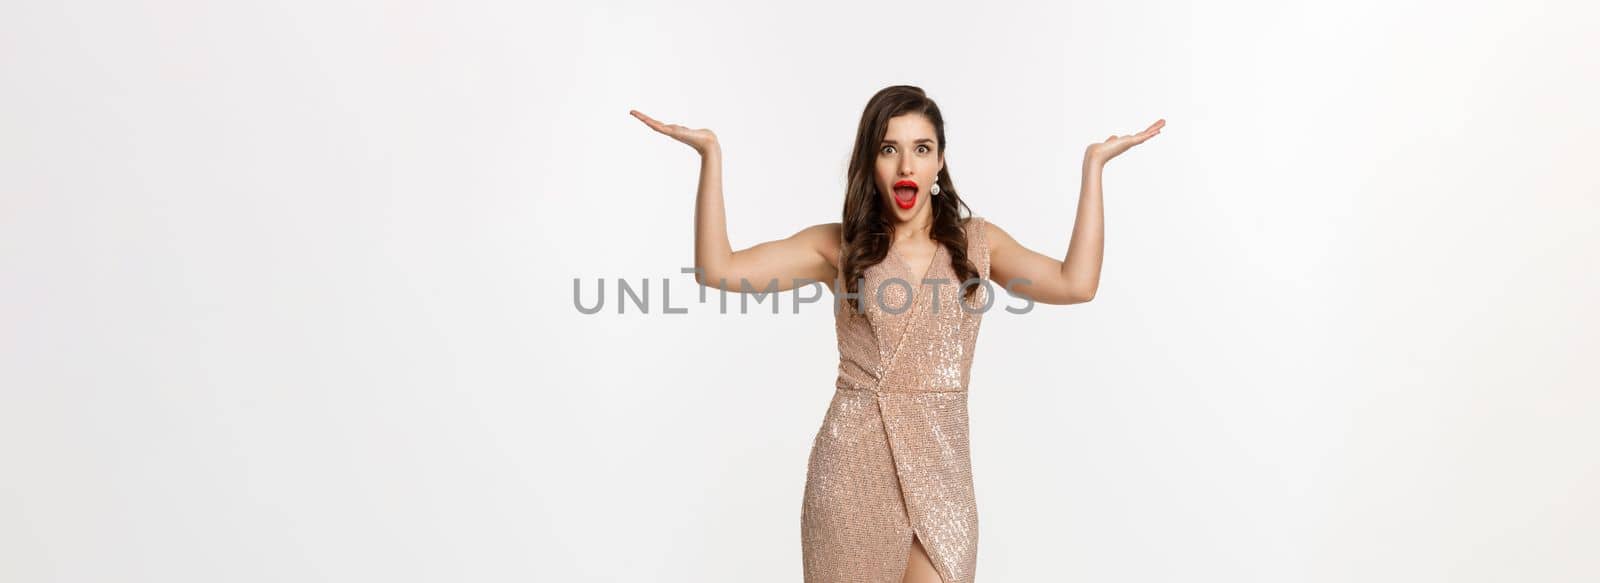 Party and celebration concept. Full-length of beautiful woman in elegant dress, standing near Christmas gifts and looking surprised, standing over white background.